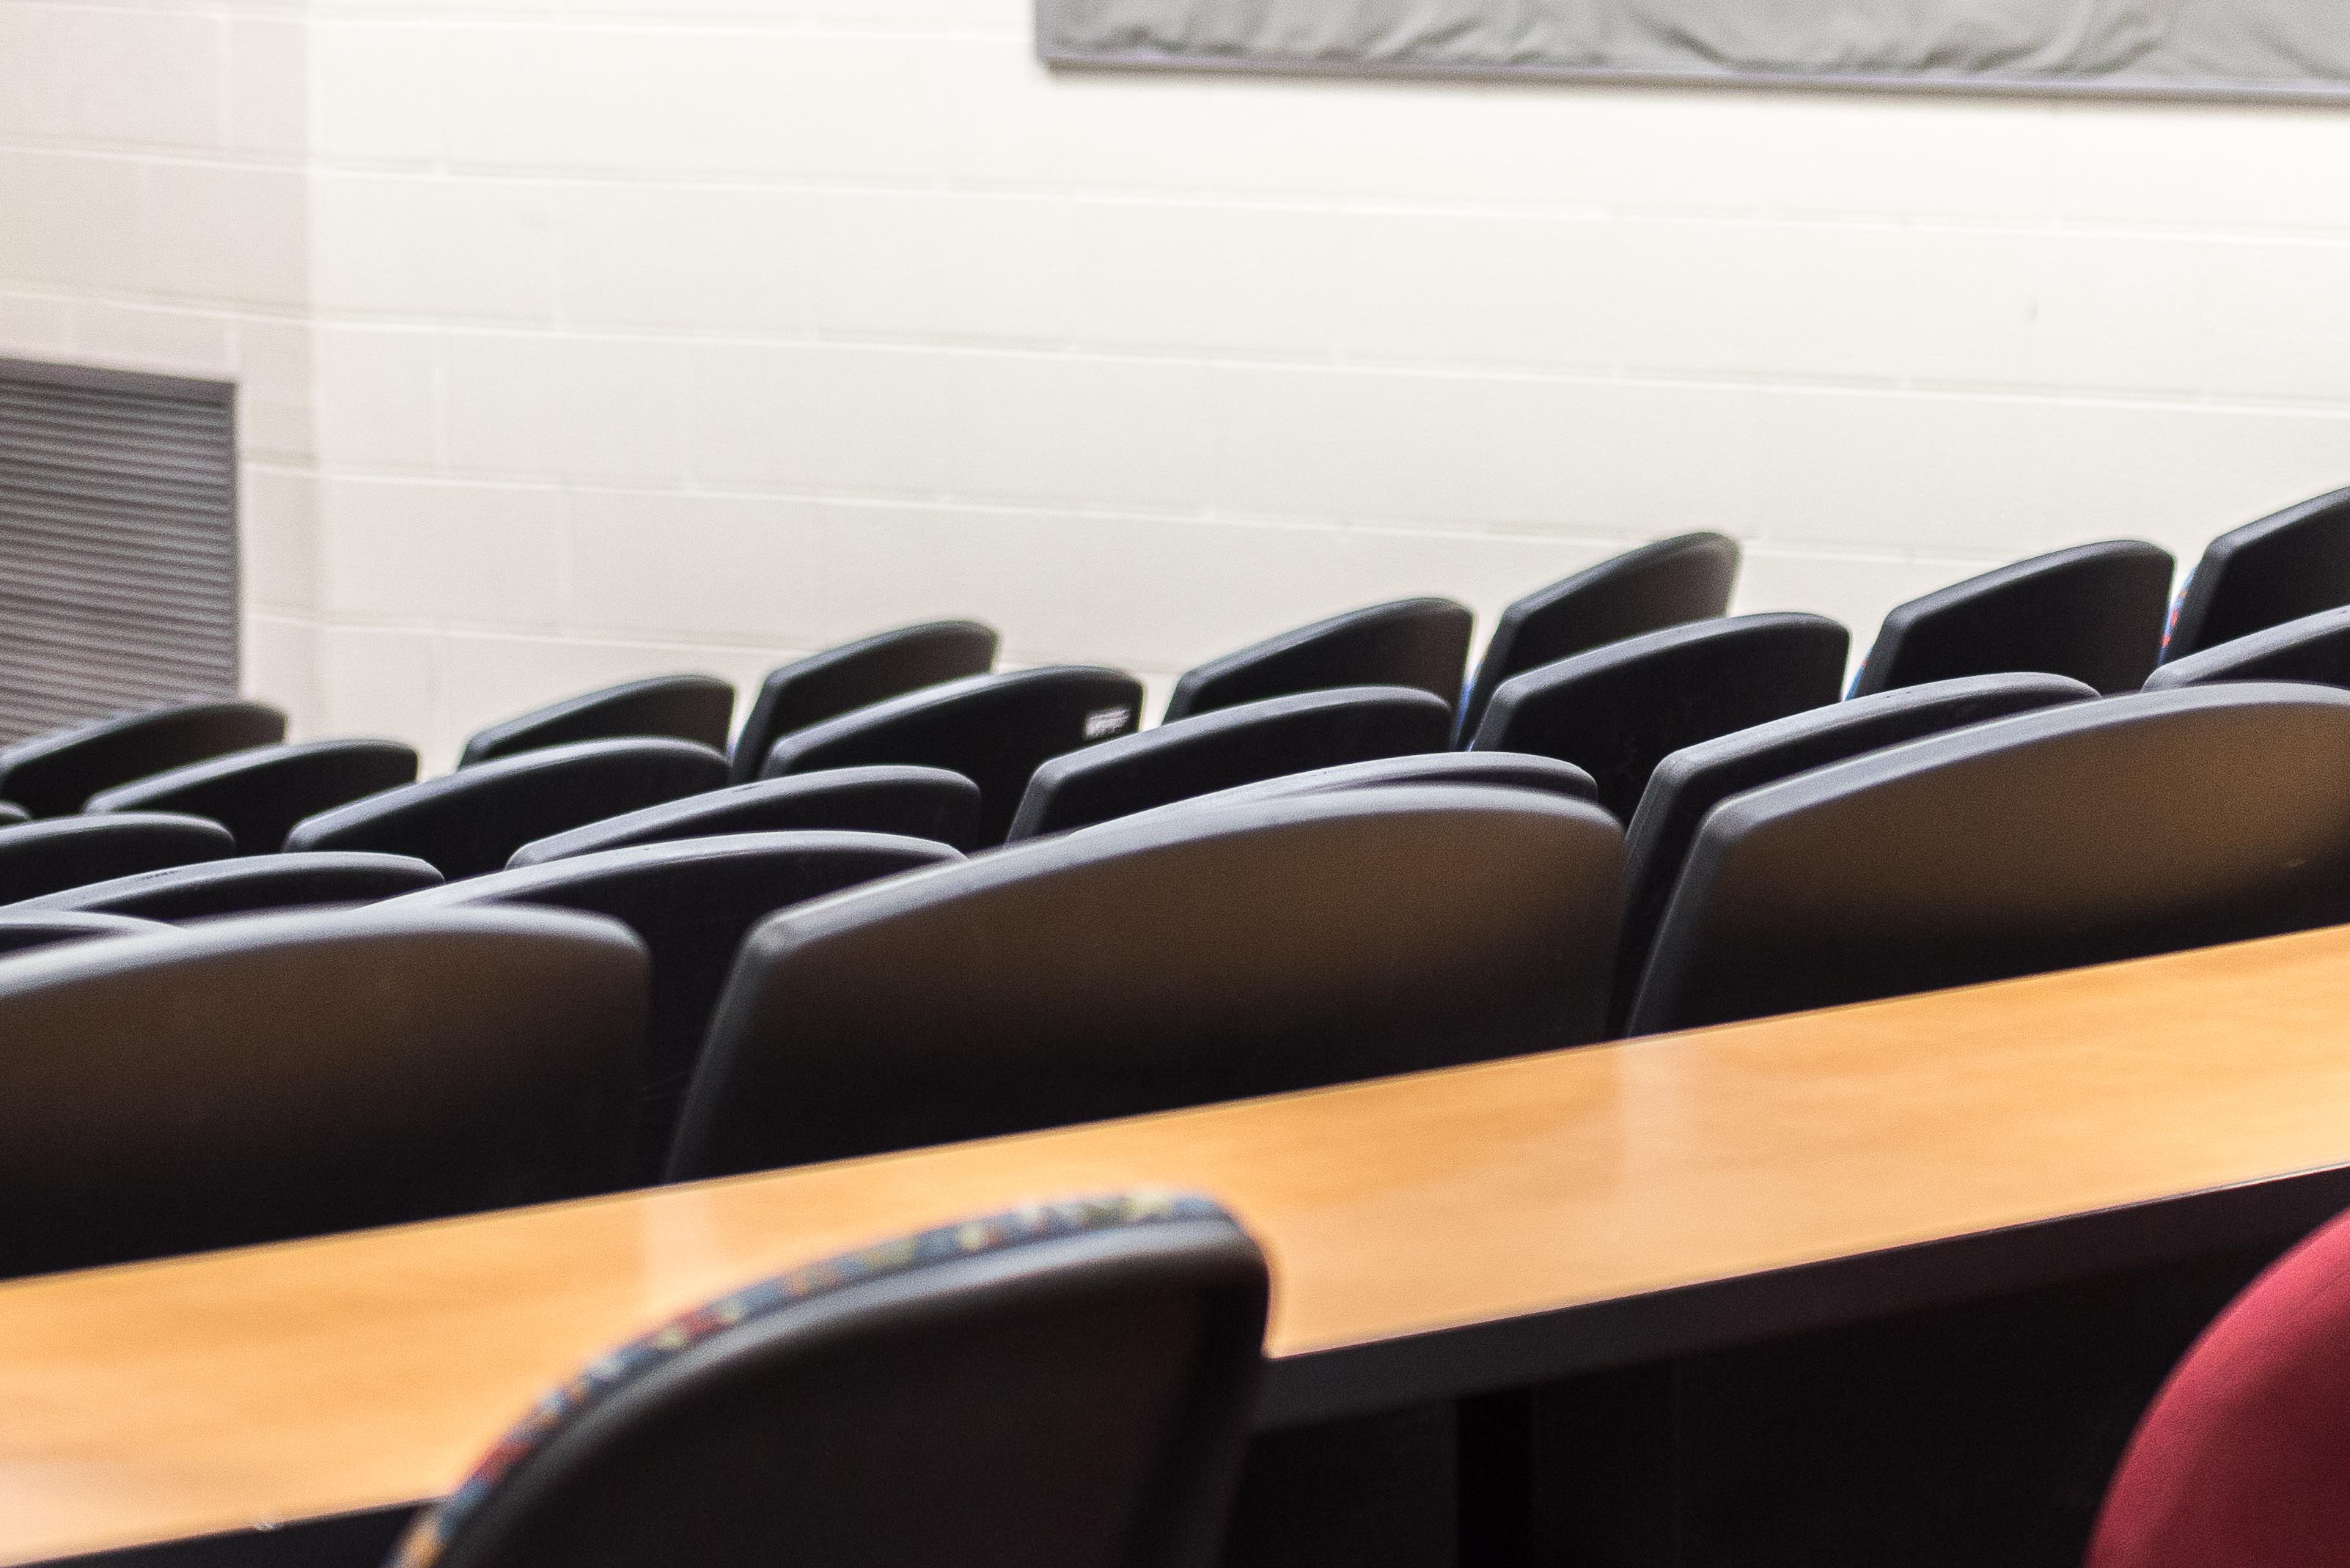 Unofficial ‘assigned seats’ confine student routine